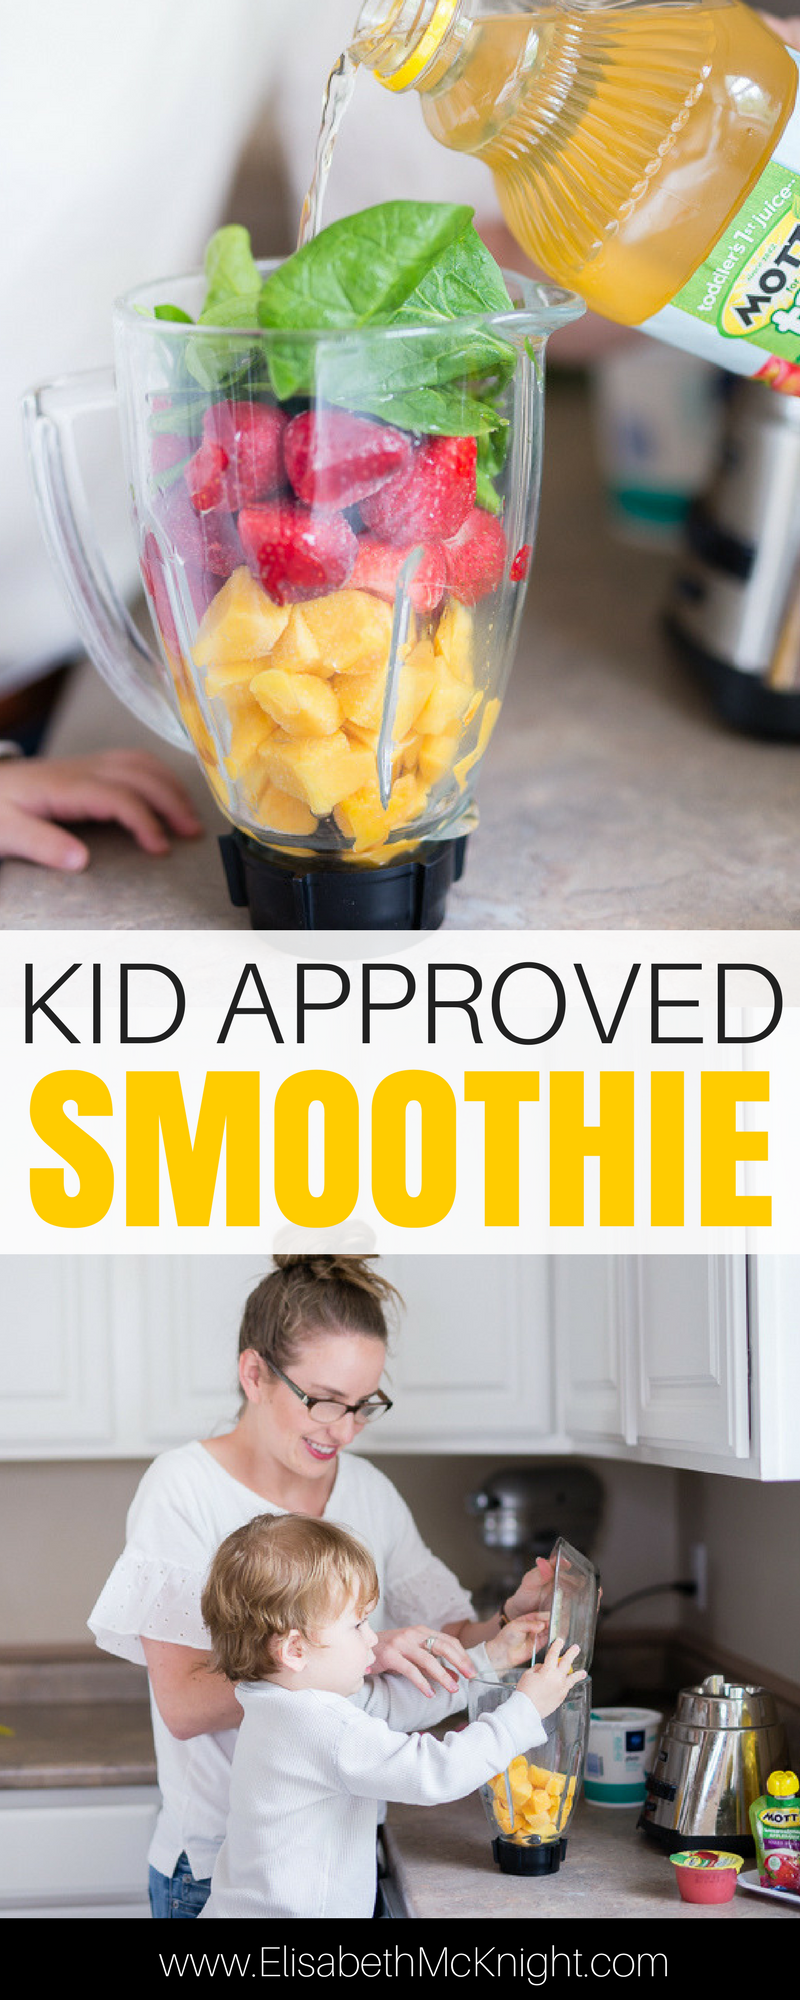 Toddler Approved Smoothie Recipe -   22 vegetable recipes for picky eaters
 ideas